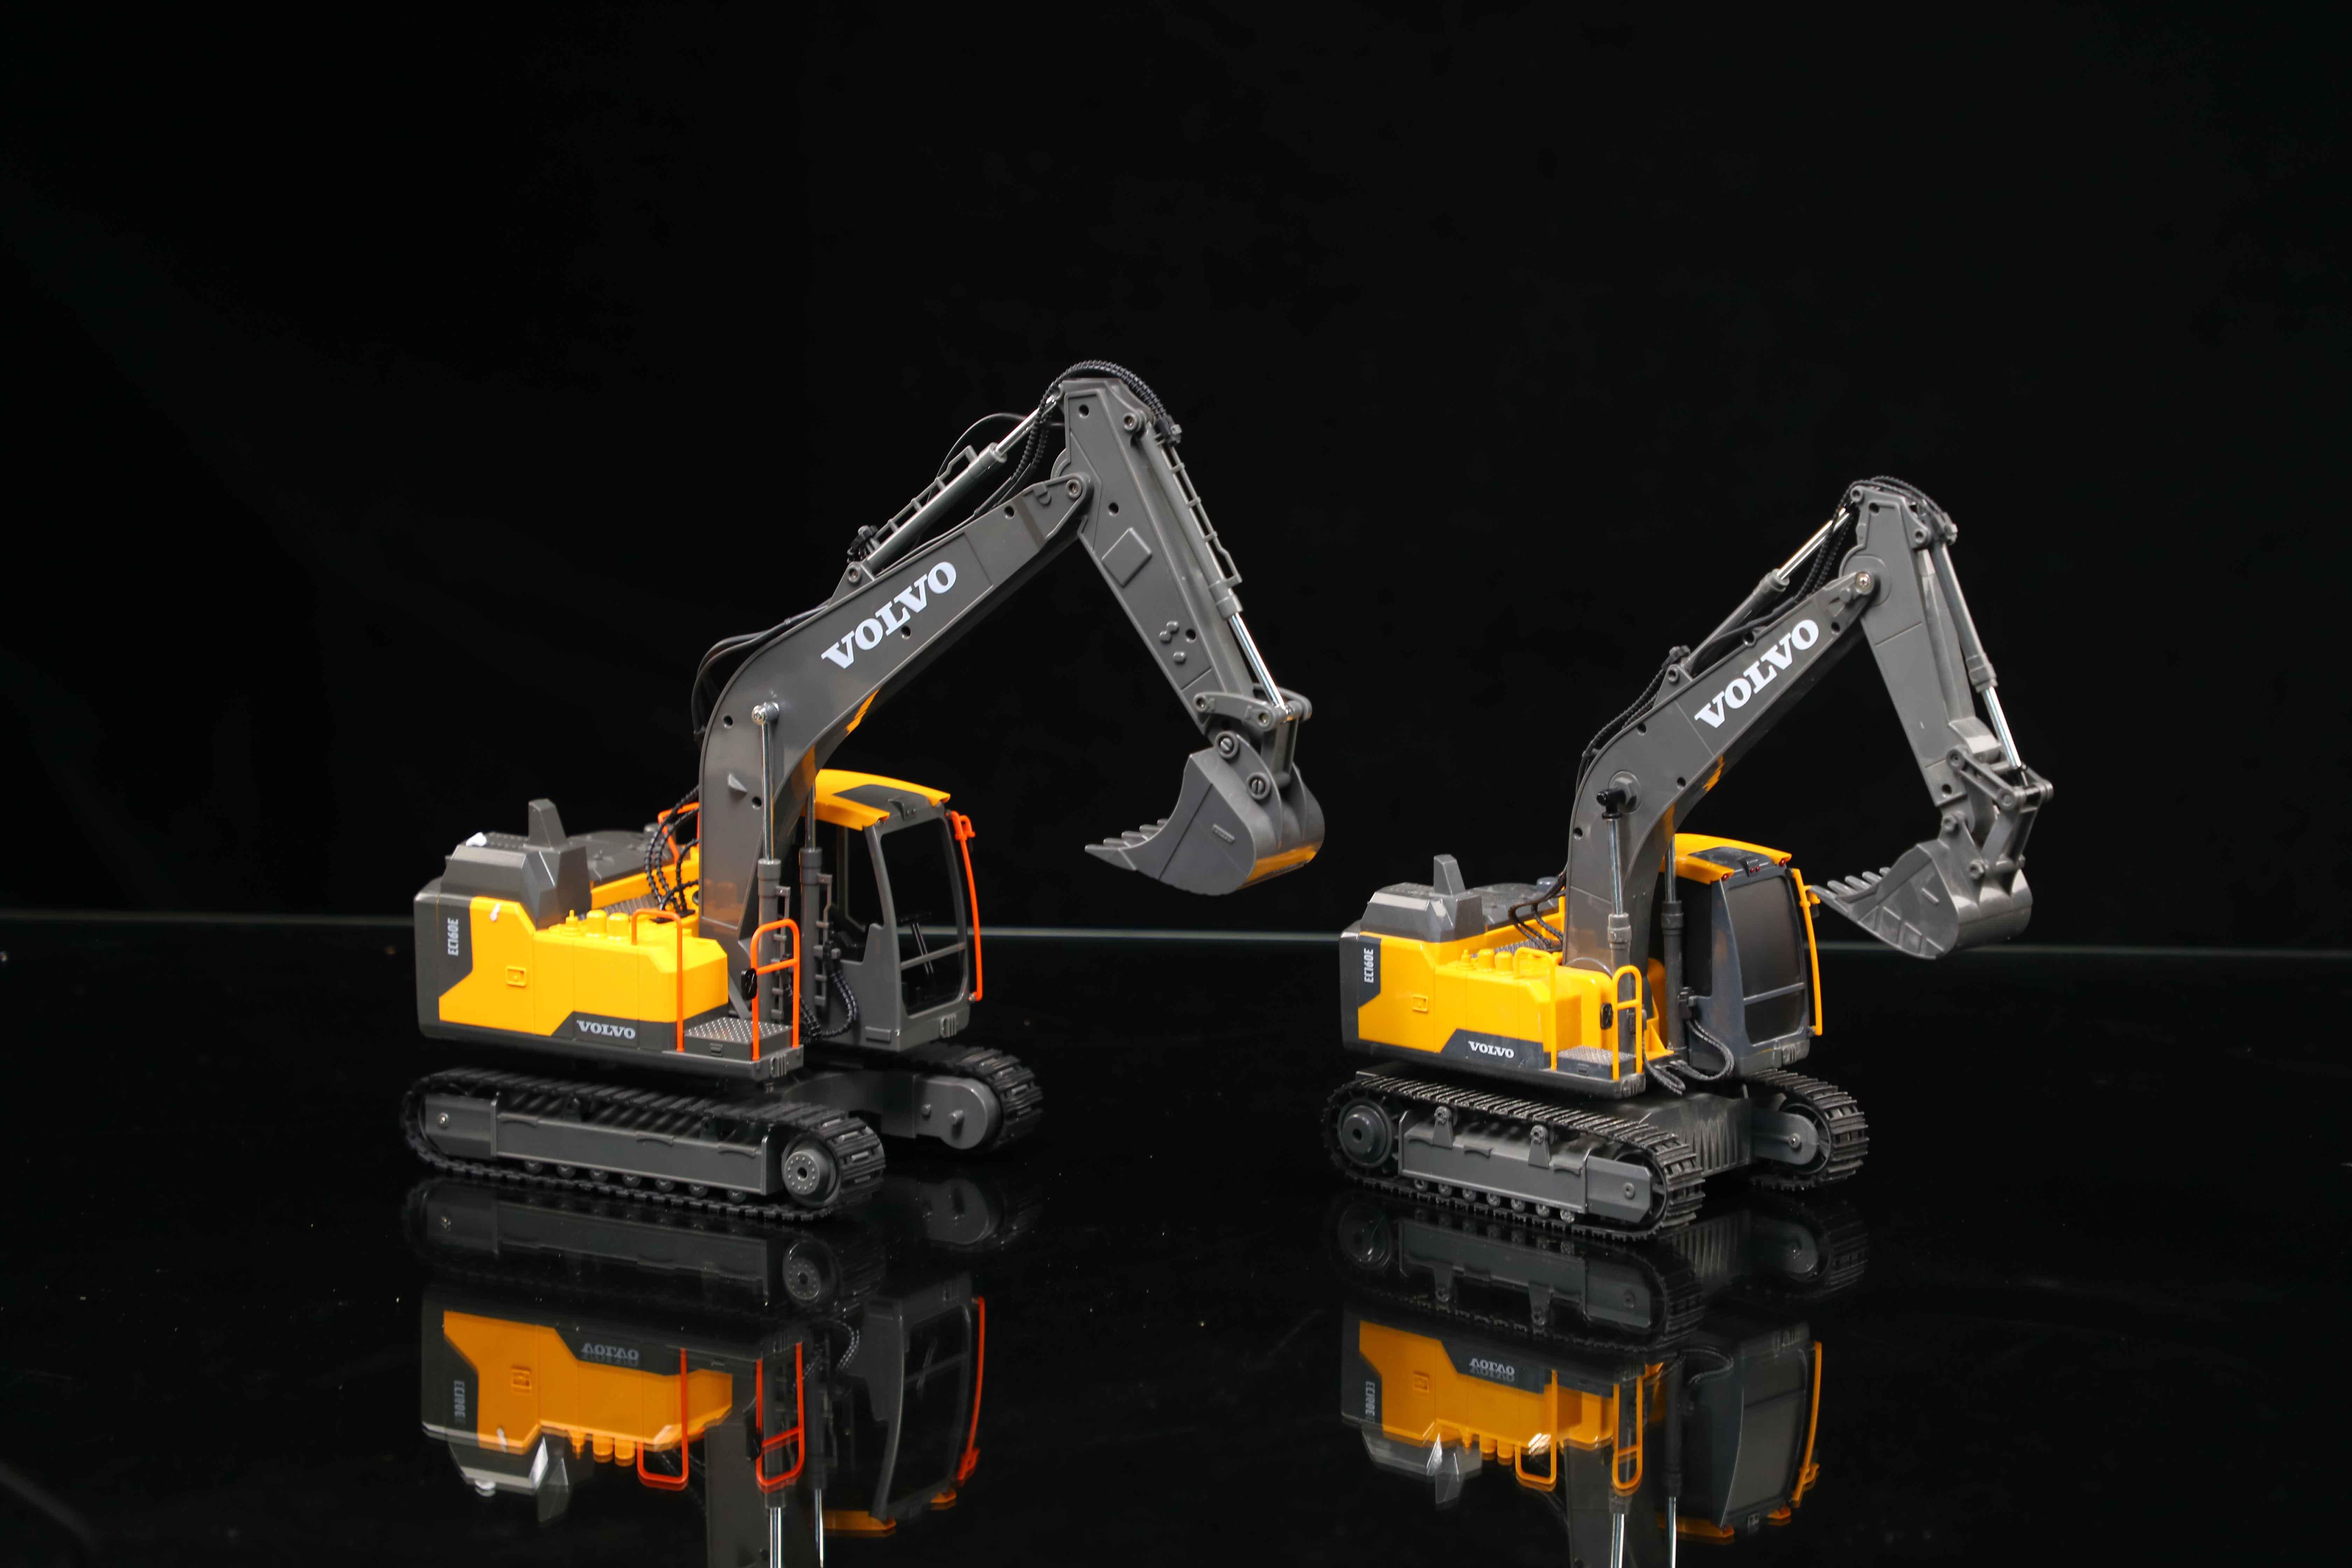 Rc Construction Vehicles For Adults: Benefits and Therapy for Adults